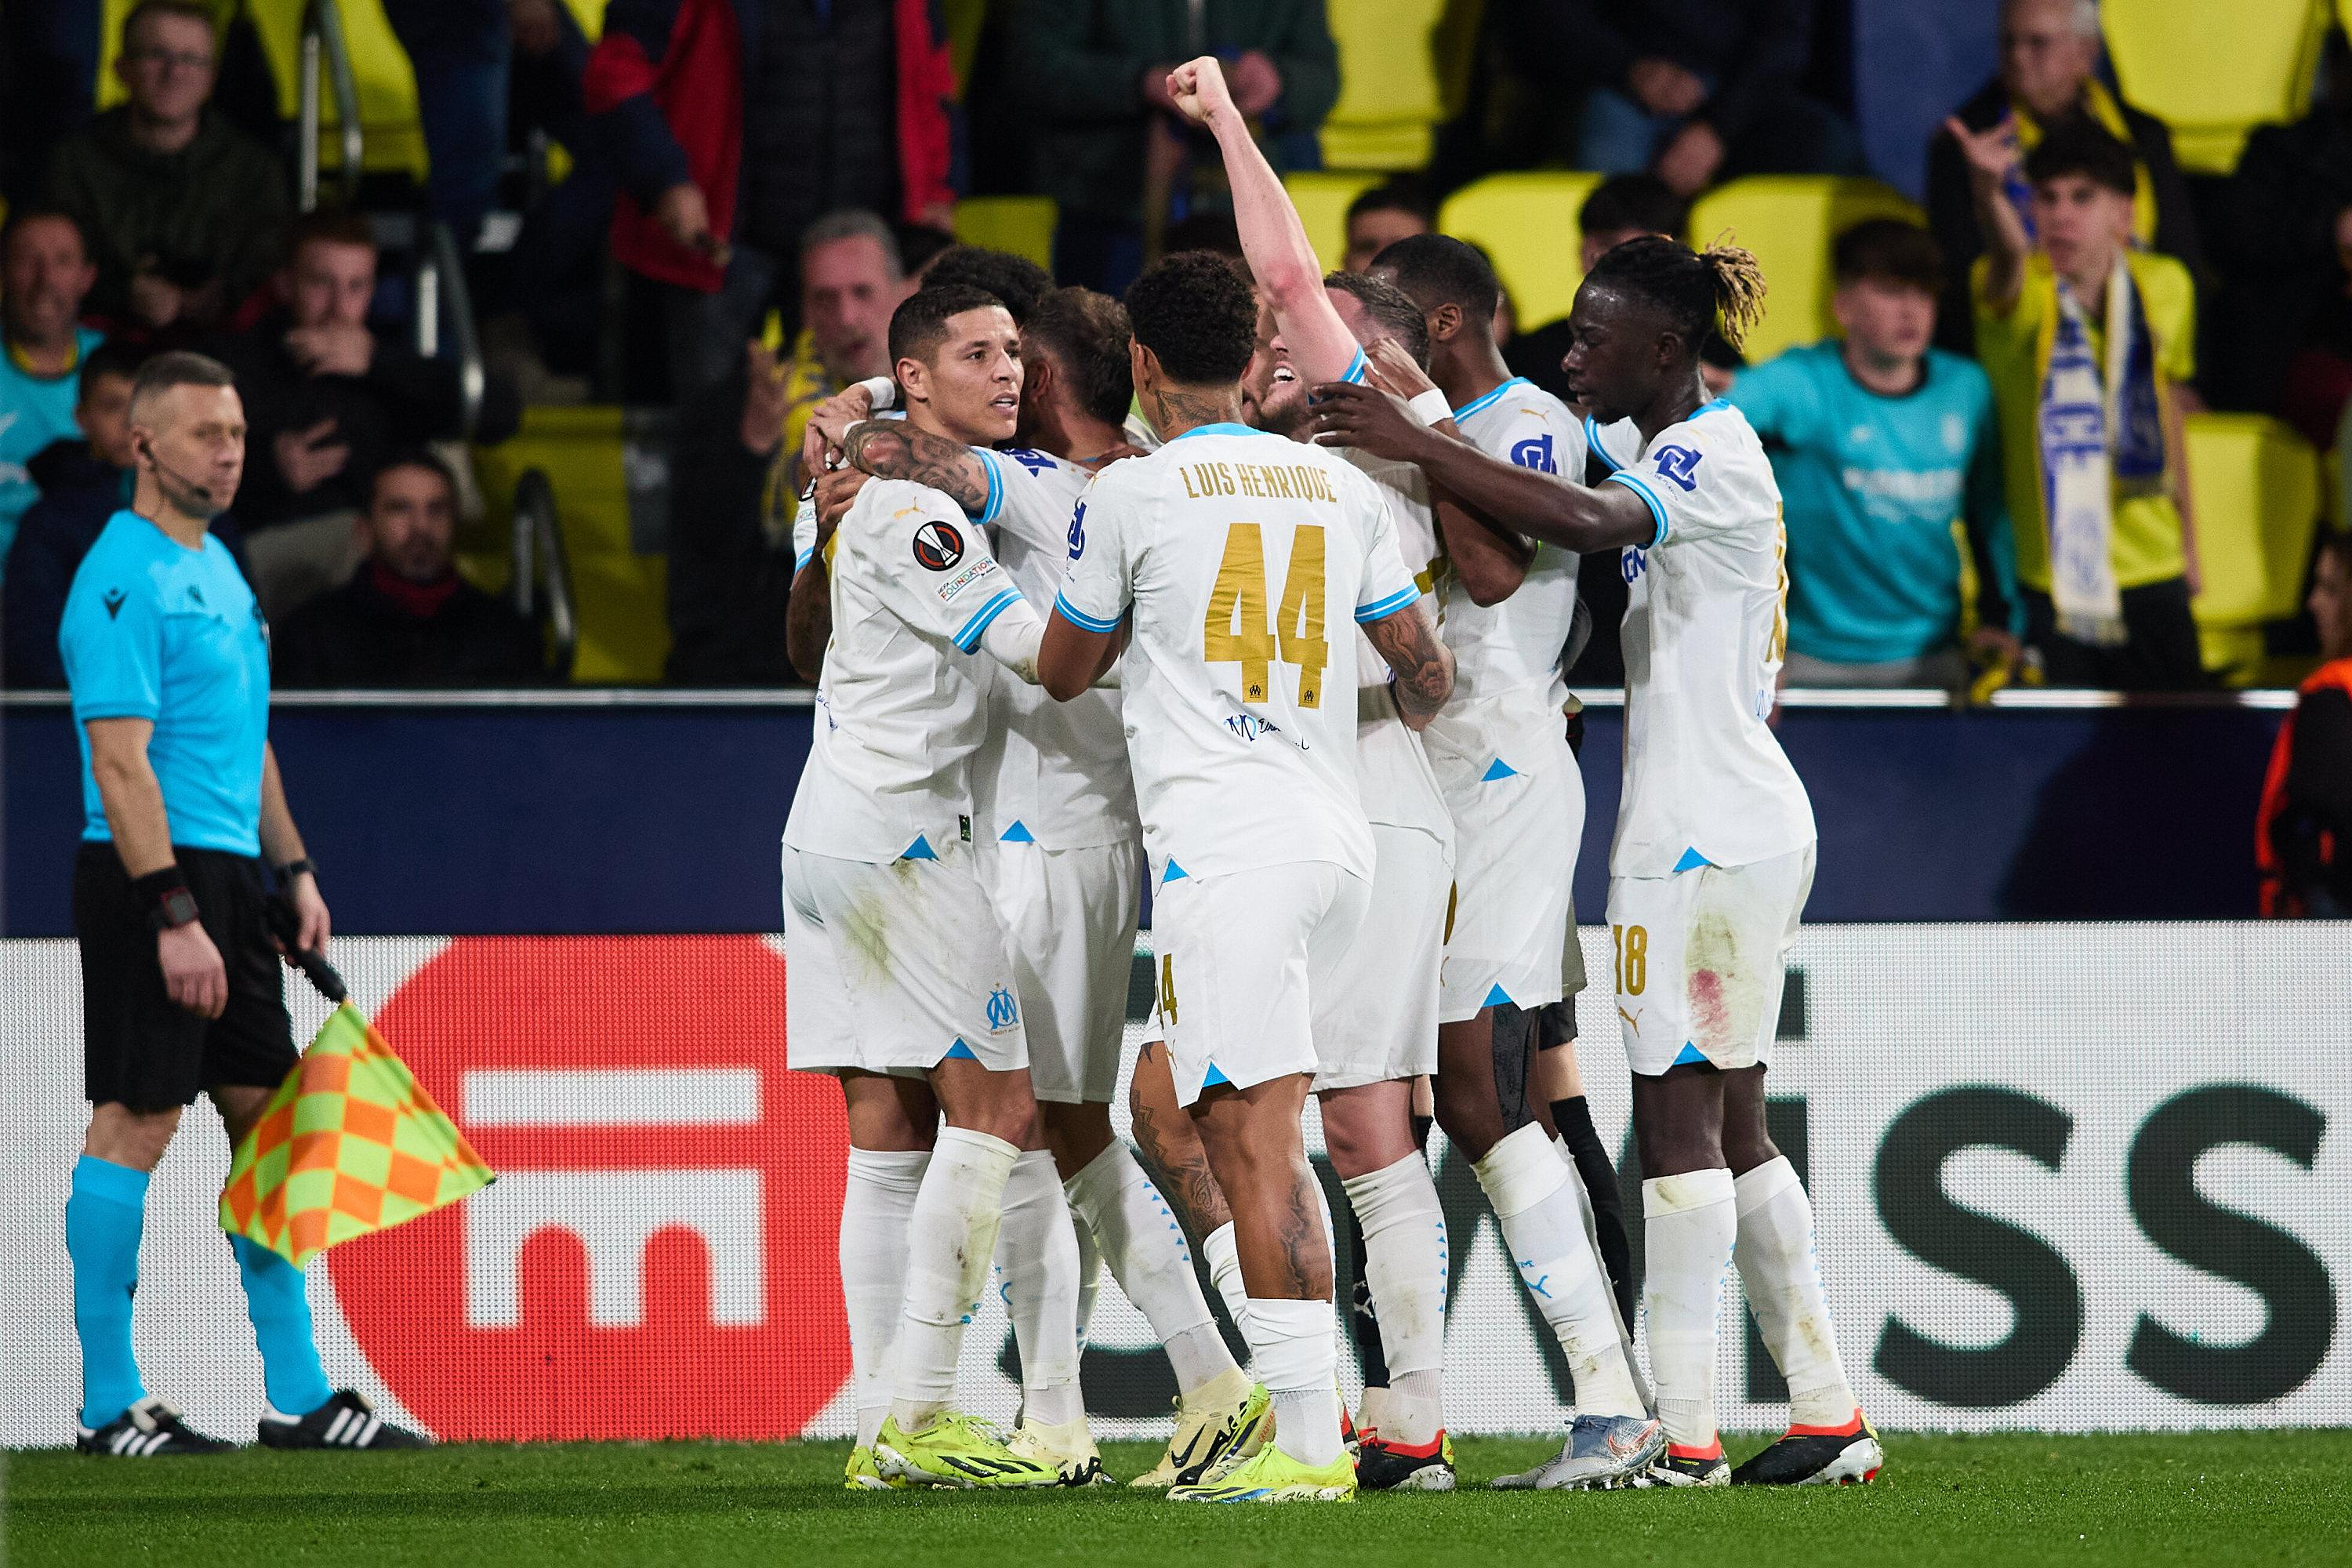 Europa League: OM face Benfica in the quarter-finals